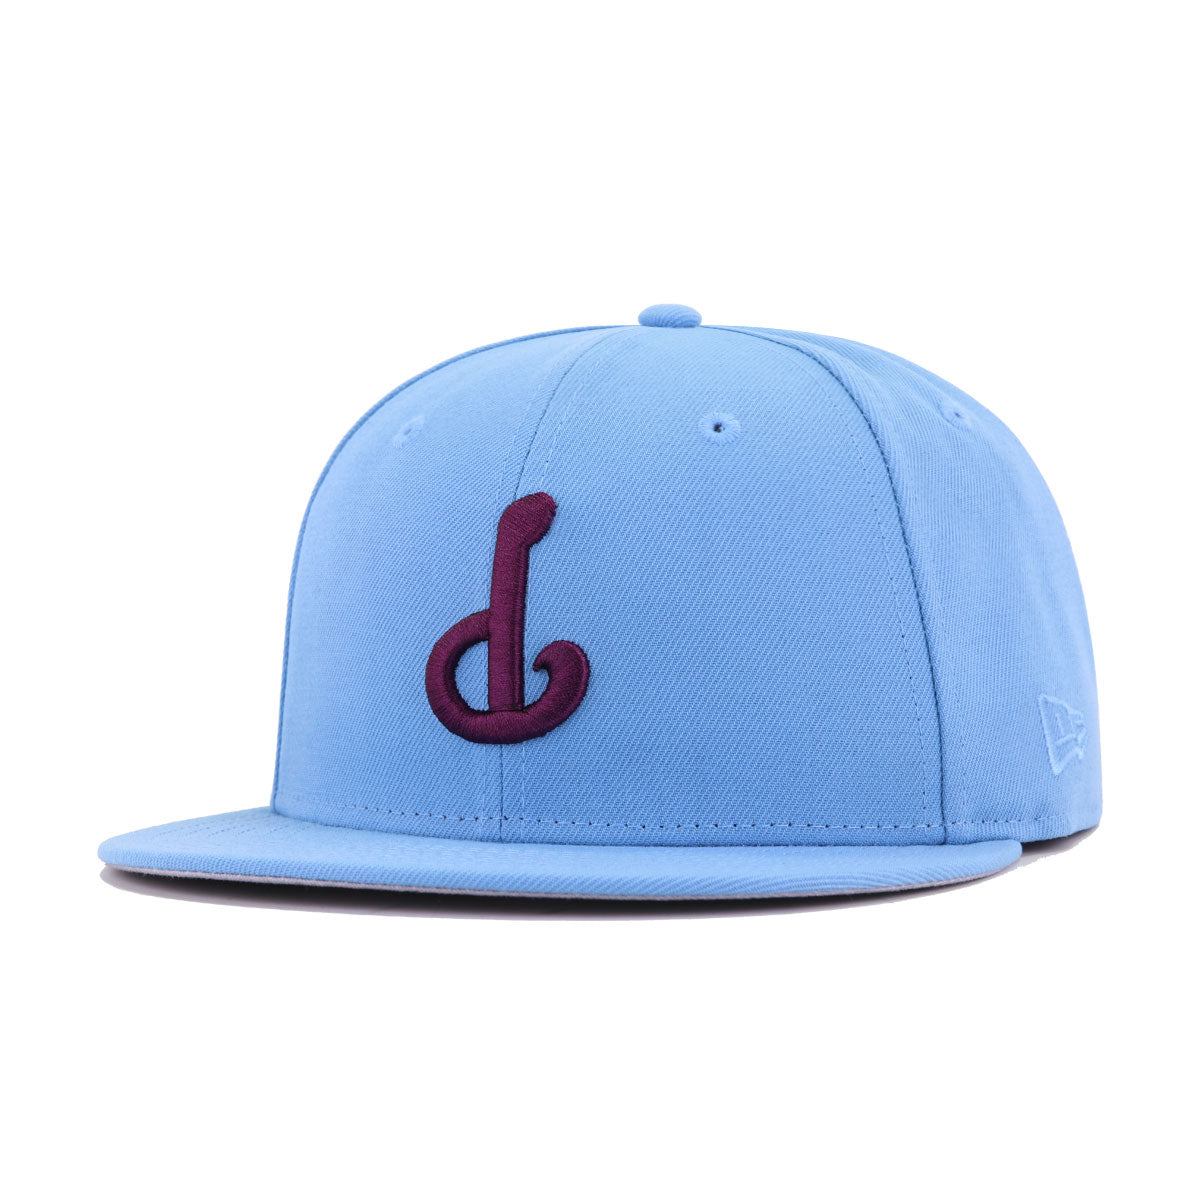 Philadelphia Phillies New Era 59FIFTY Fitted Hat - Light Blue